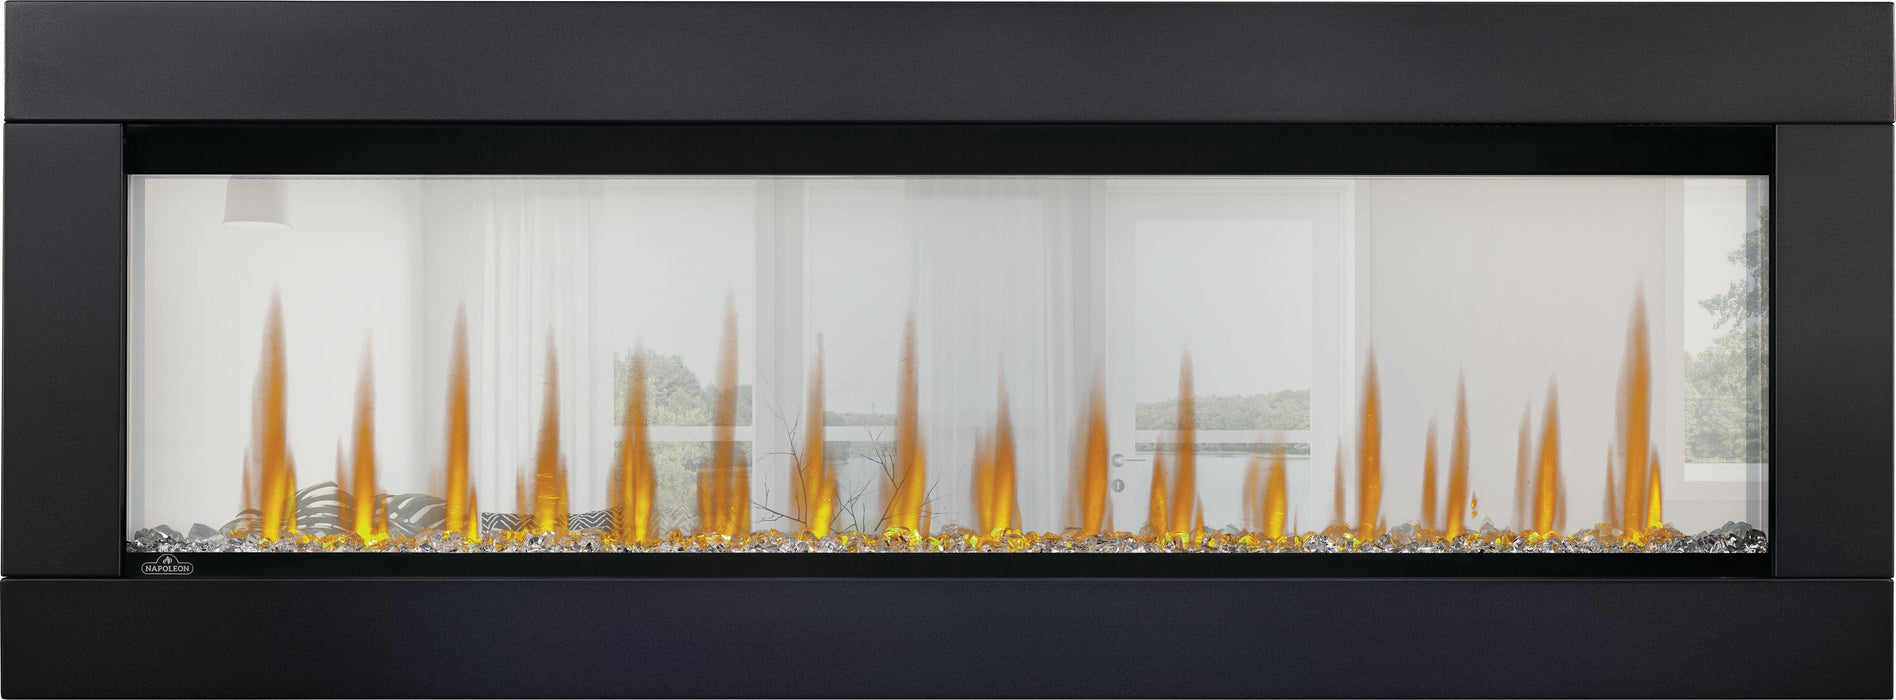 Napoleon Napoleon CLEARion Elite 50″ See Through Built-in Electric Fireplace NEFBD50HE Canada Electric NEFBD50HE Built-In Electric Fireplace 629169074570